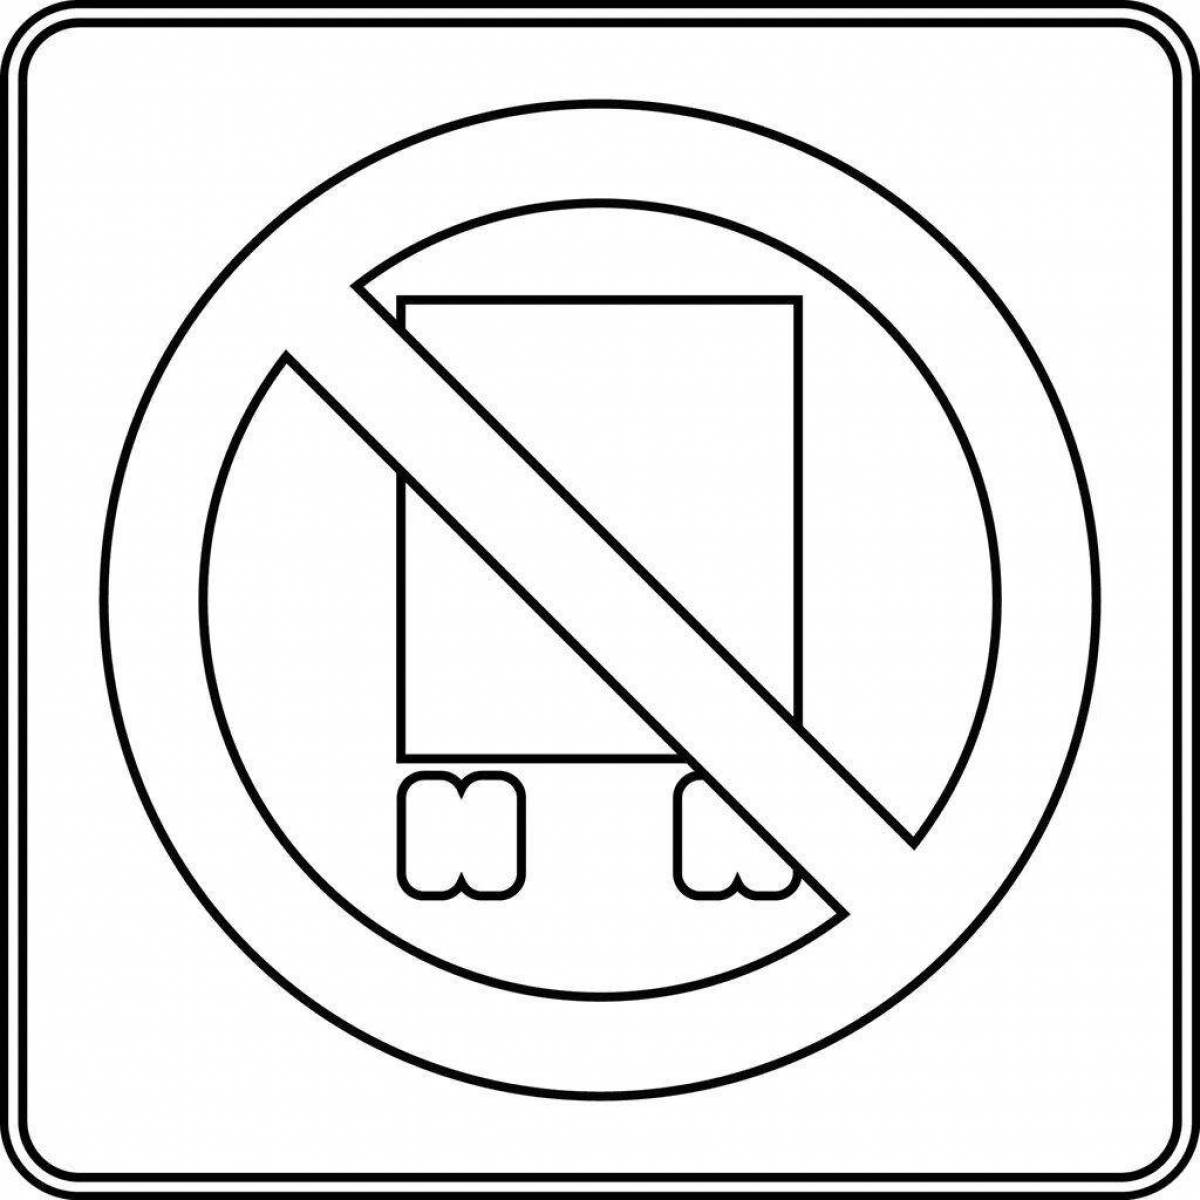 Intriguing parking road sign coloring page